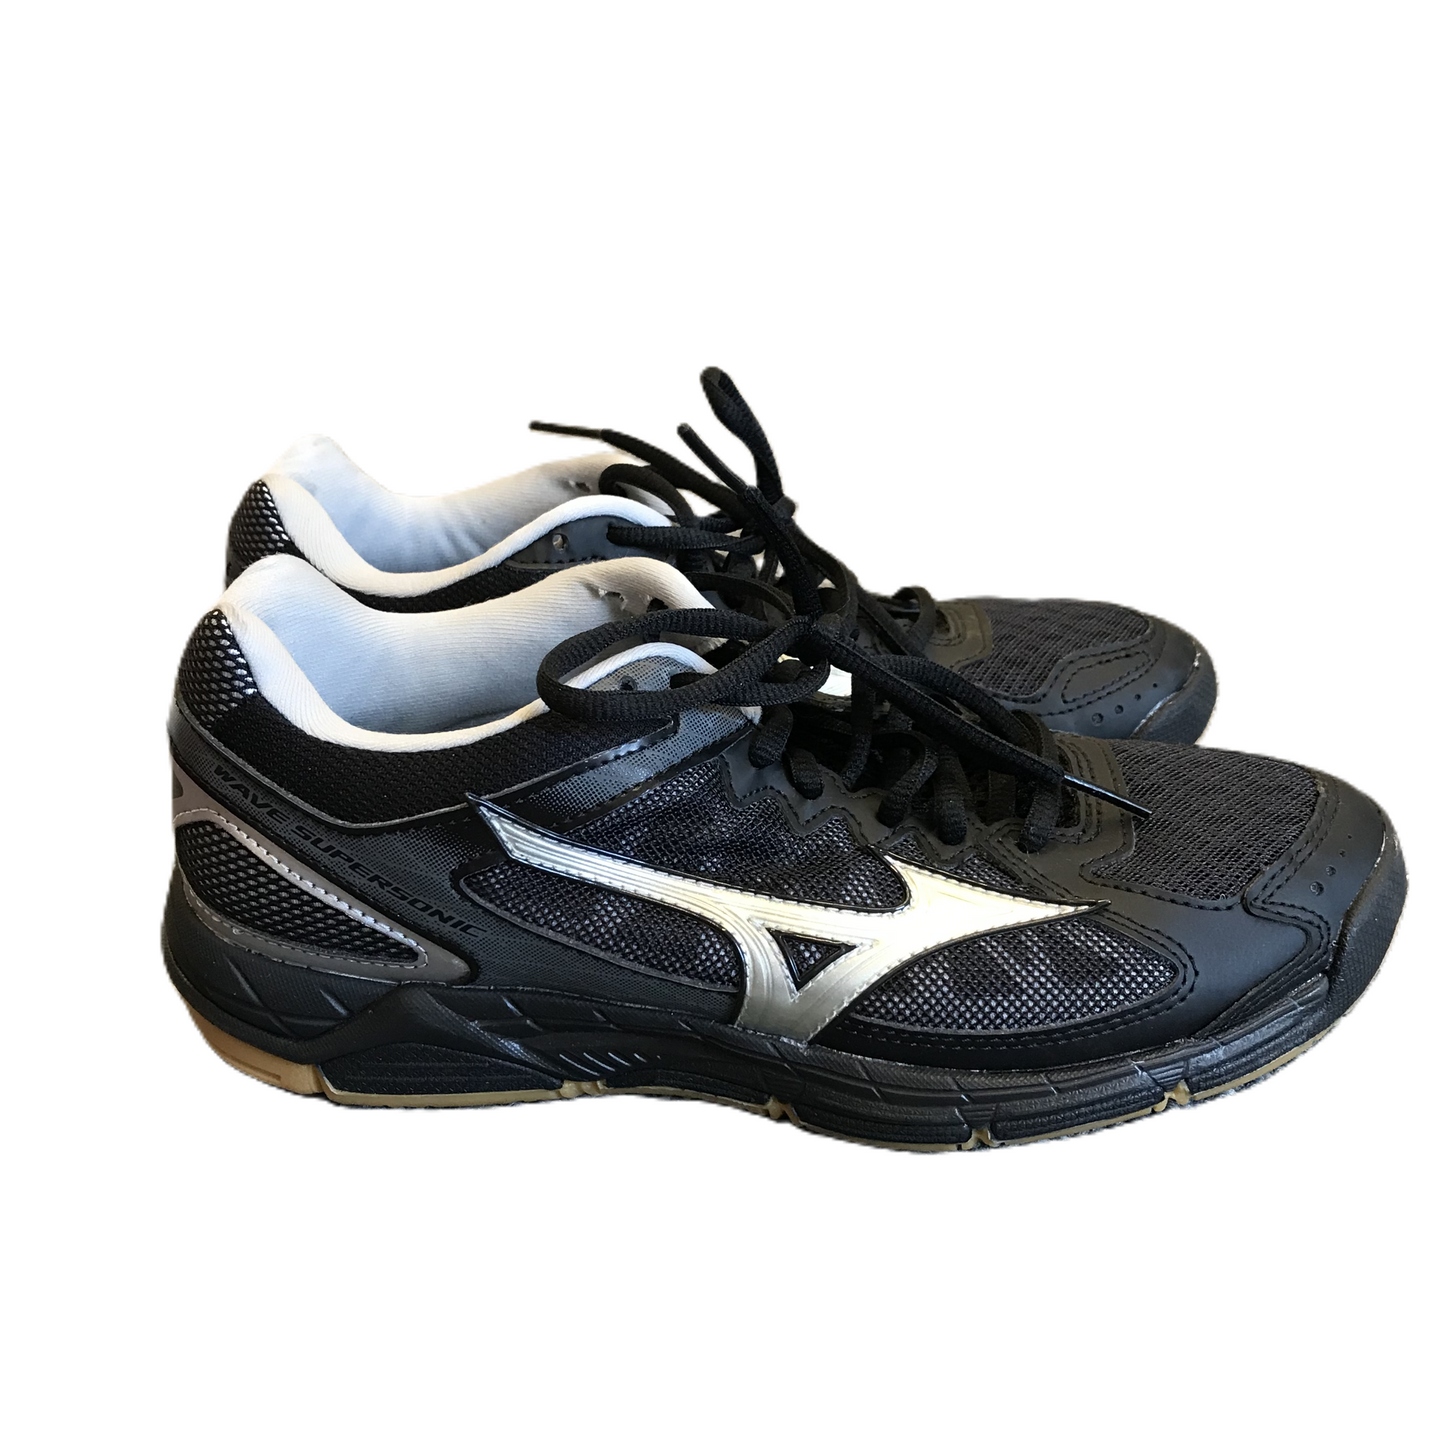 Black Shoes Athletic By Mizuno, Size: 8